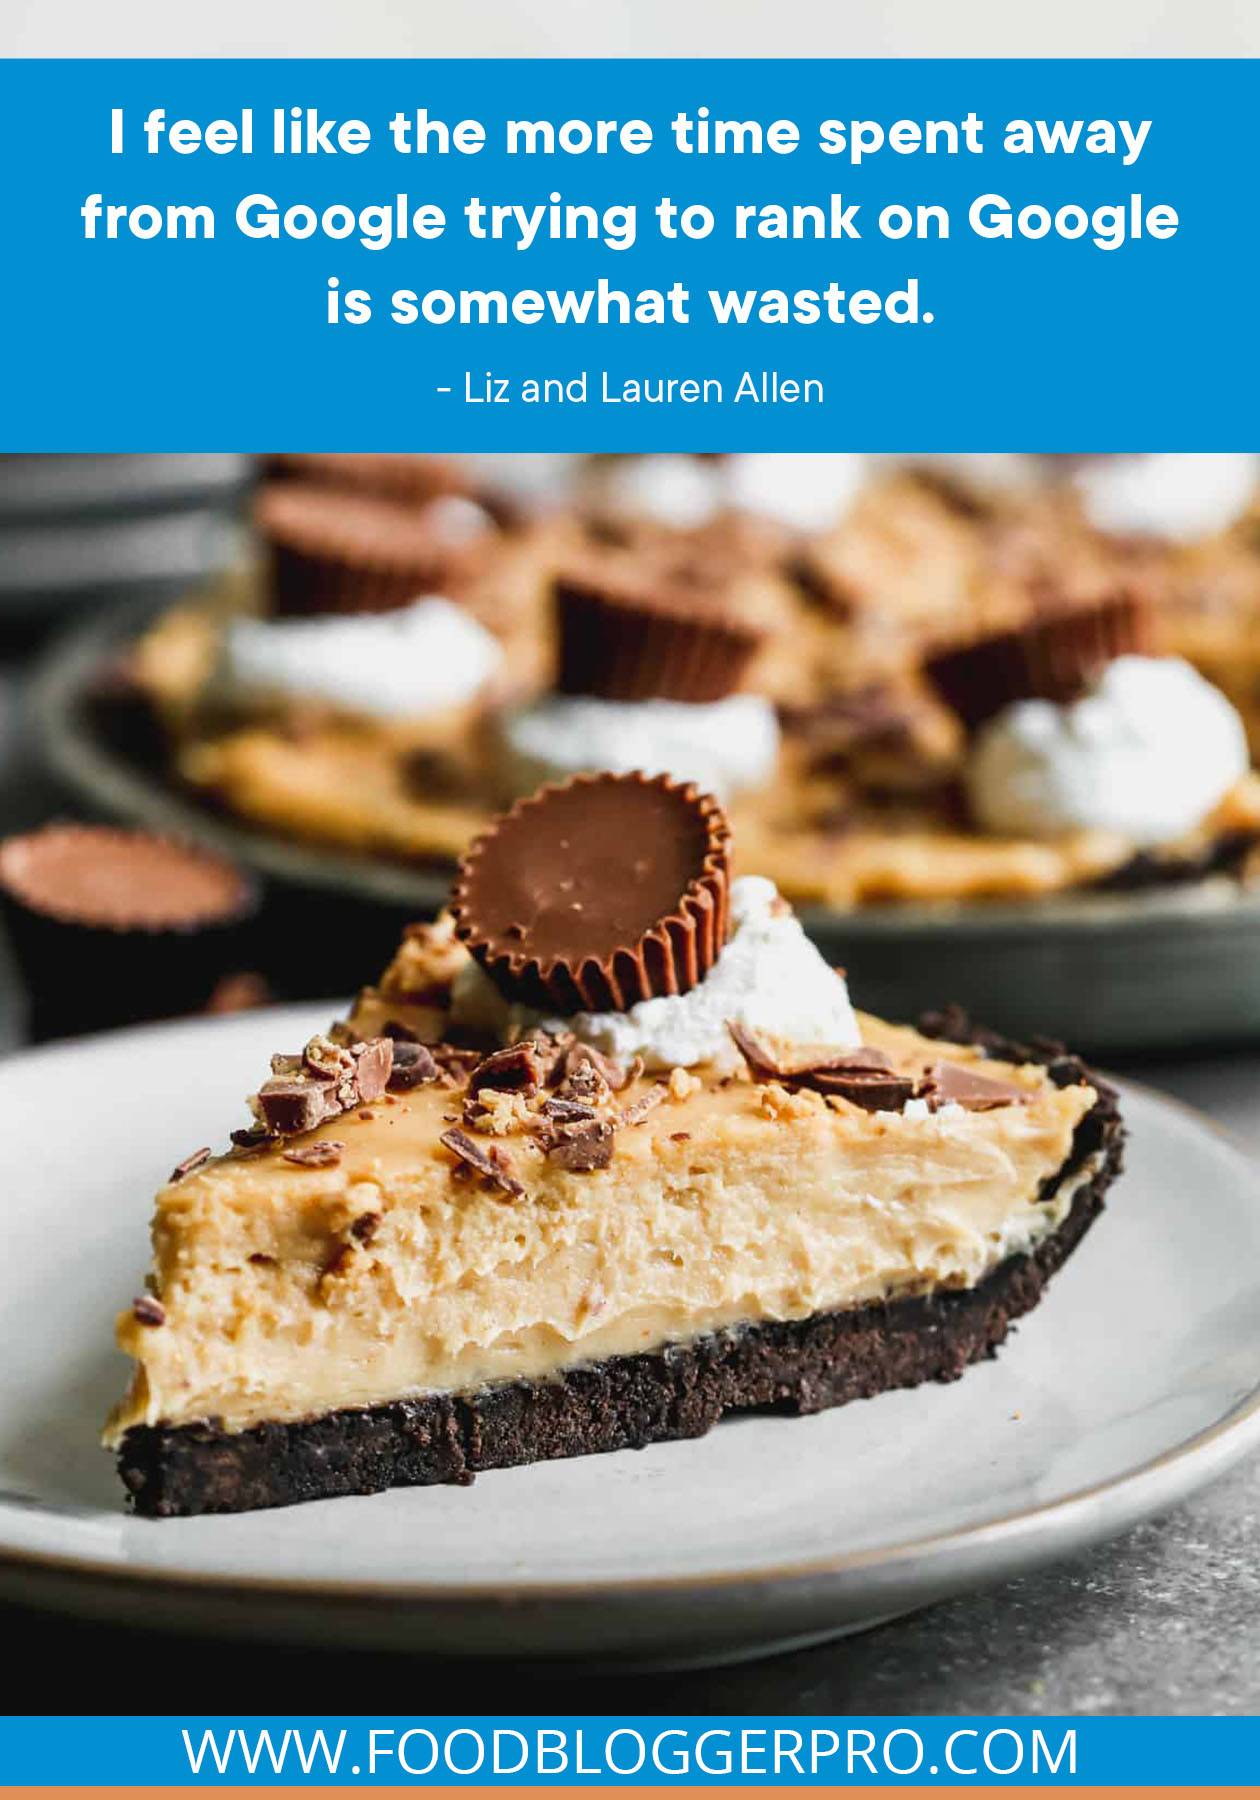 A photograph of a slice of peanut butter pie with a quote from Liz and Lauren Allen's episode of The Food Blogger Pro Podcast, "I feel like the more time spent away from Google trying to rank on Google is somewhat wasted."